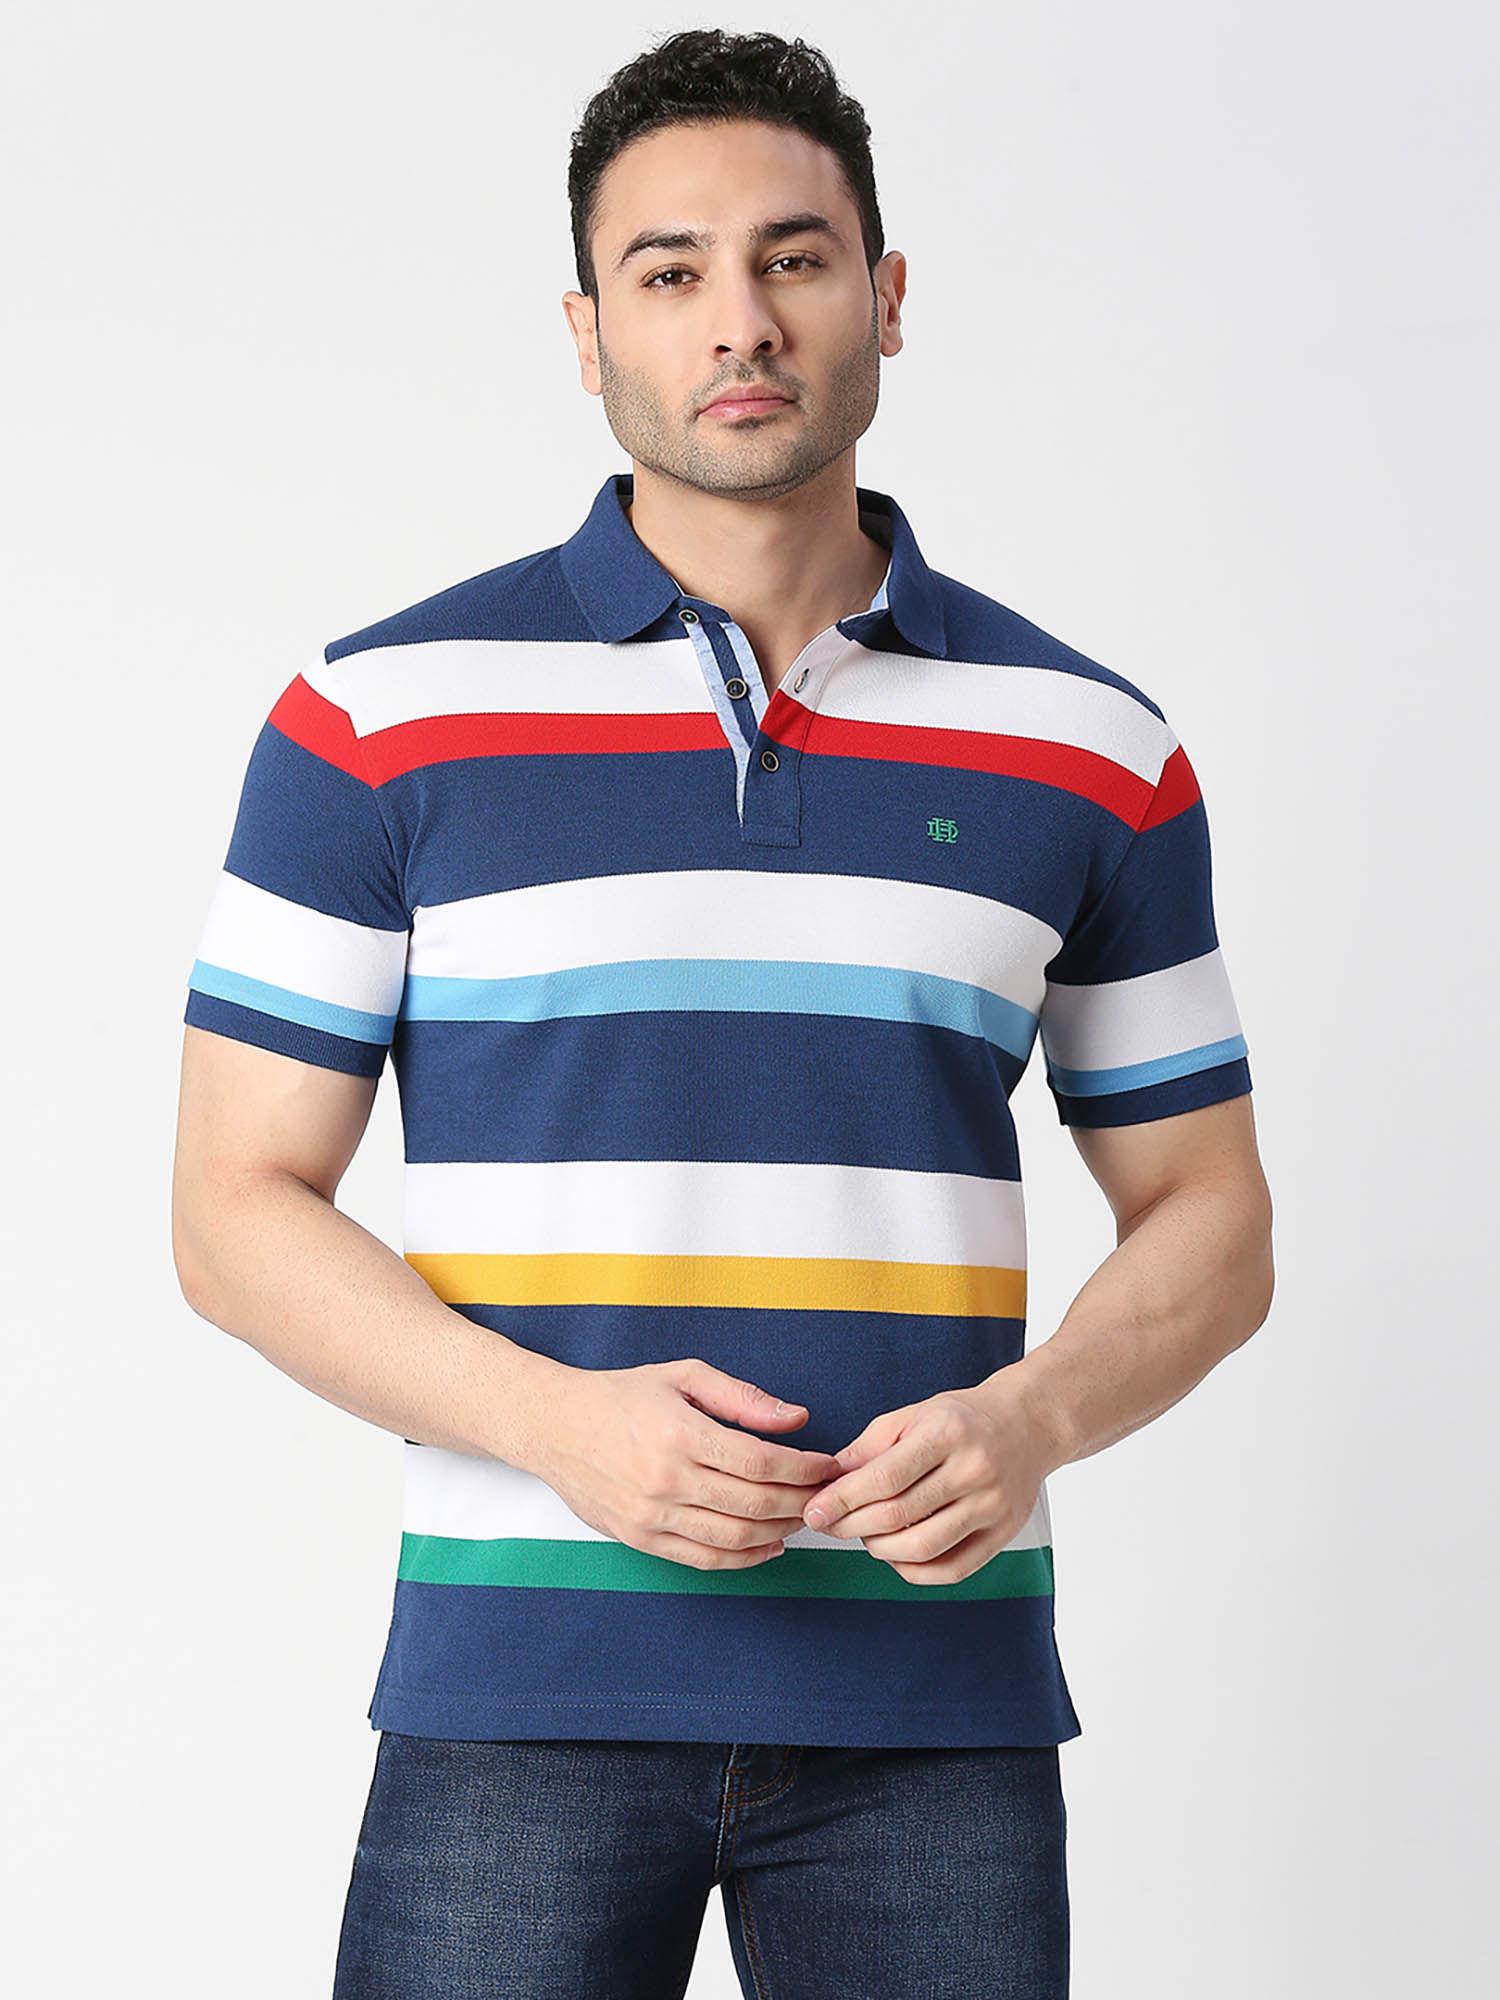 half-sleeves-a-f-blue-and-white-pique-striped-polo-t-shirt